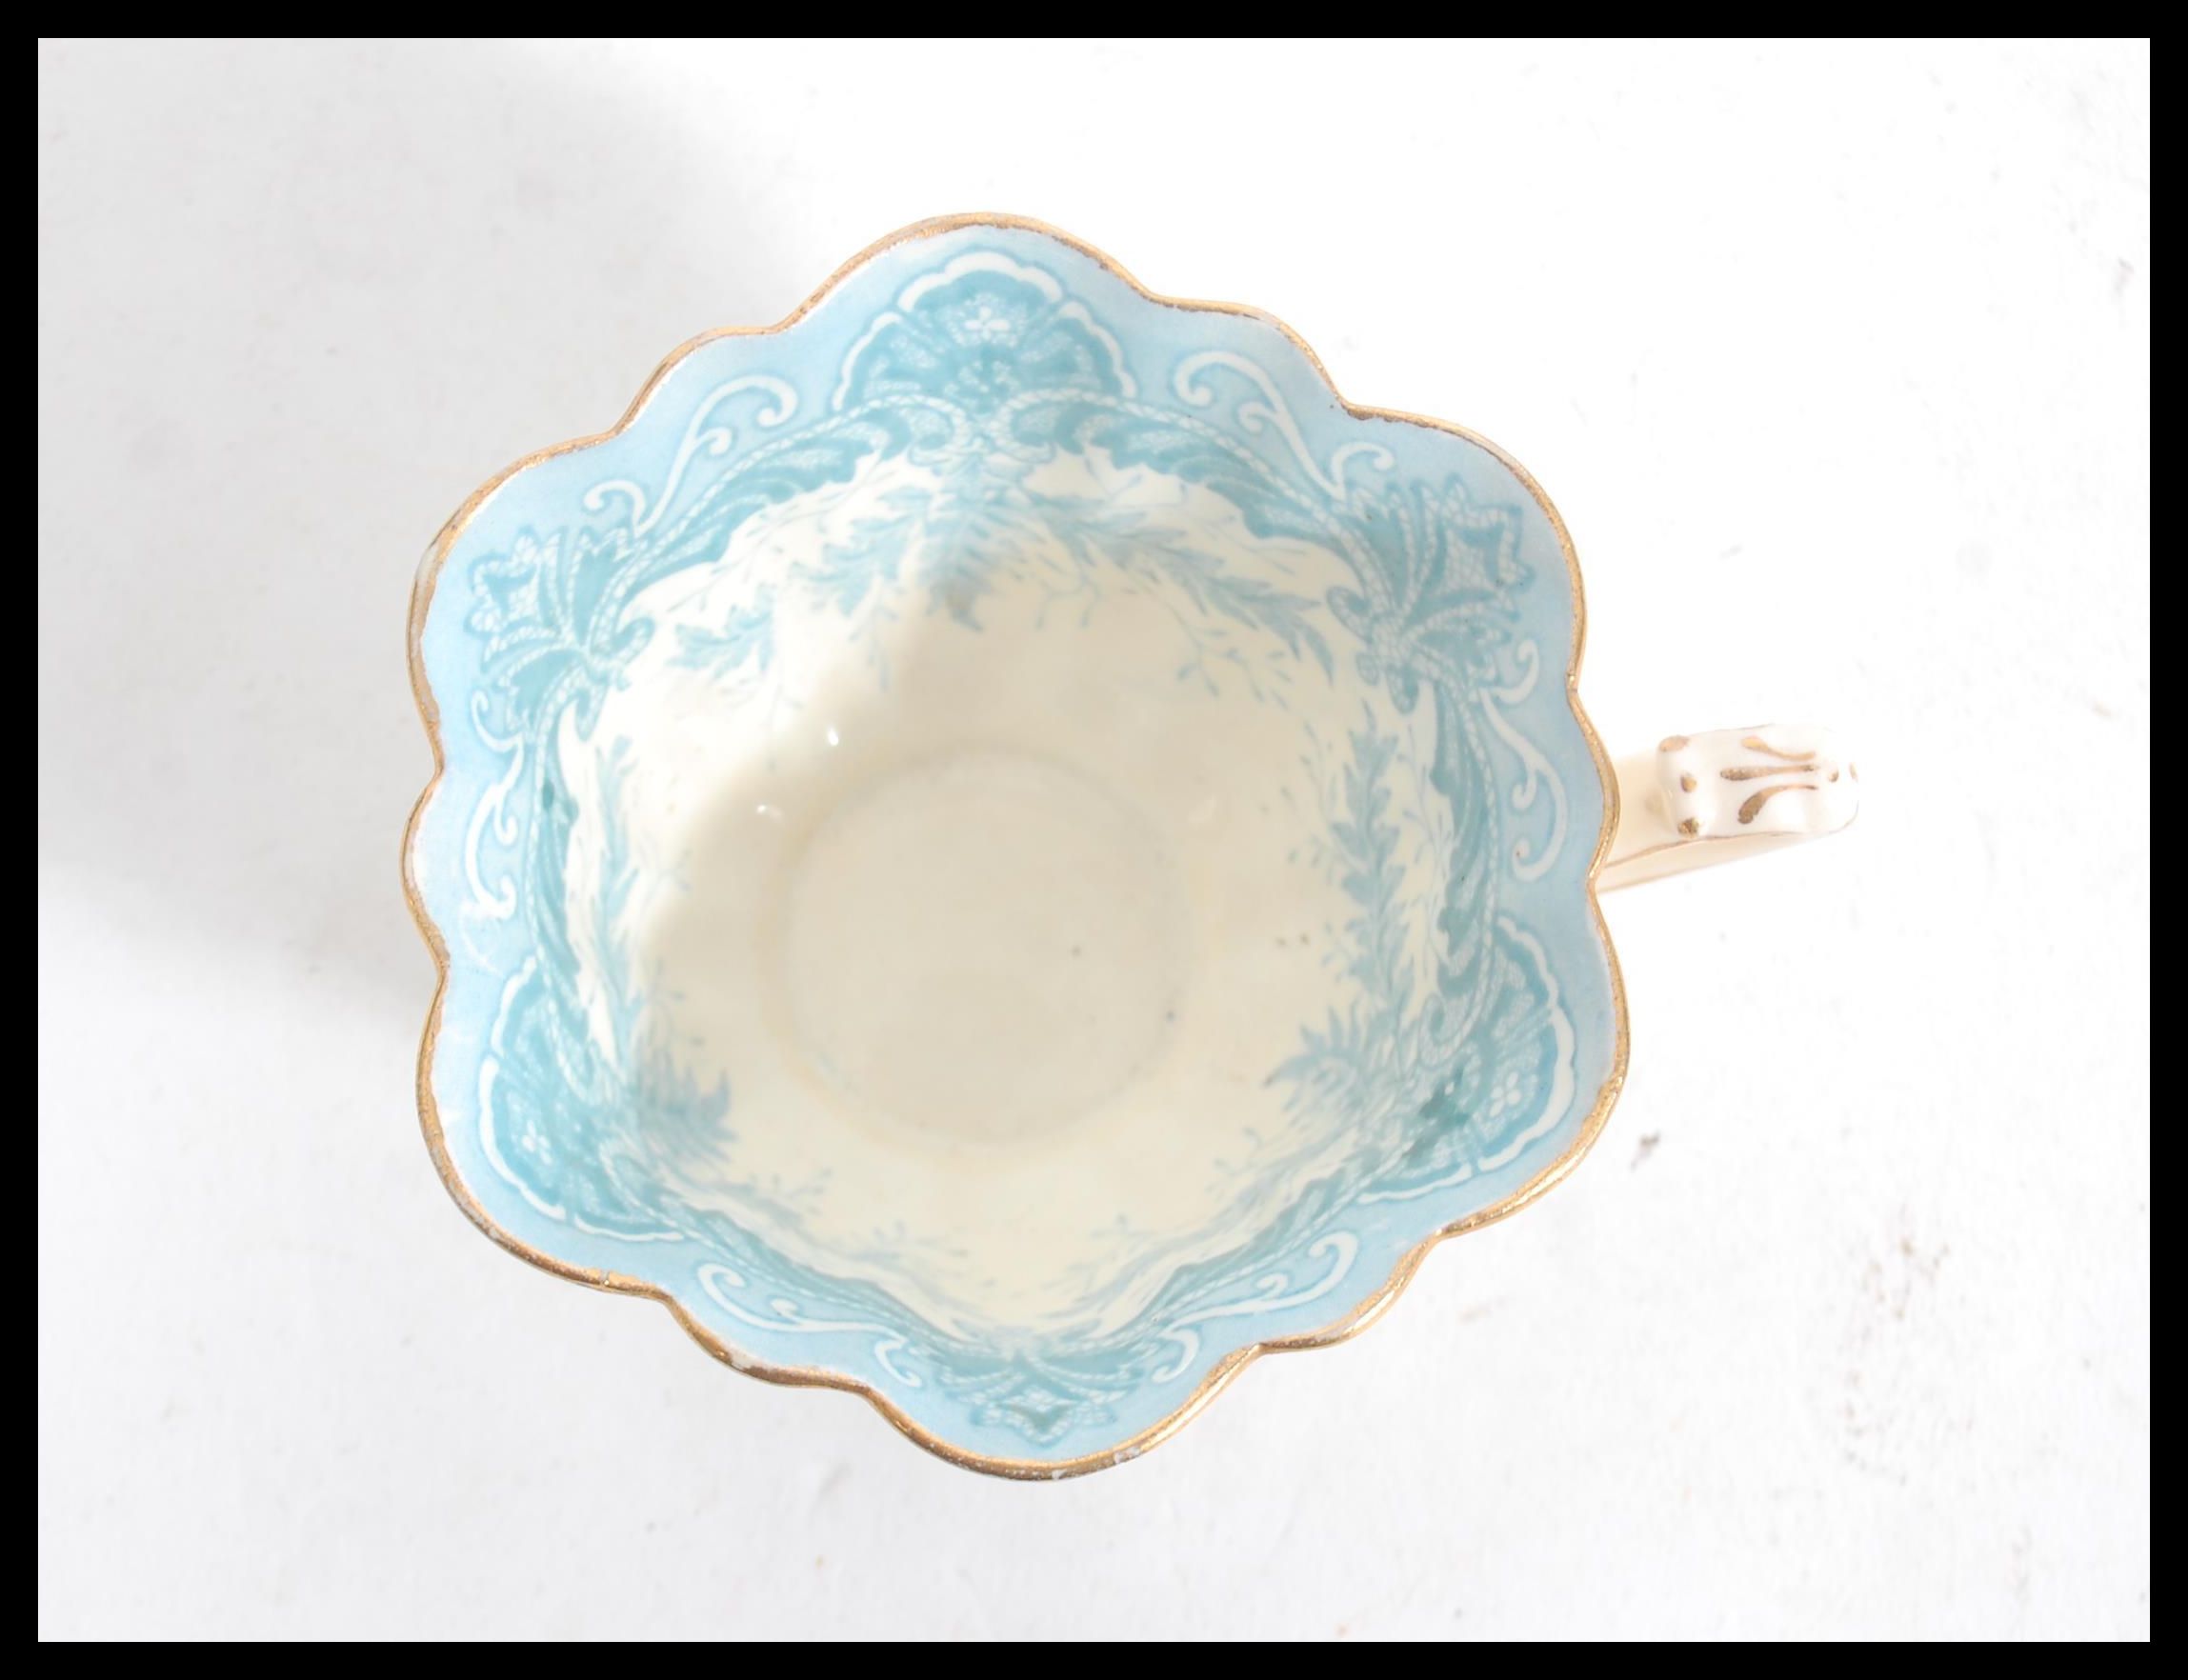 A 19th century Victorian Foley tea service transfer printed in the fern pattern in blue having - Image 10 of 11